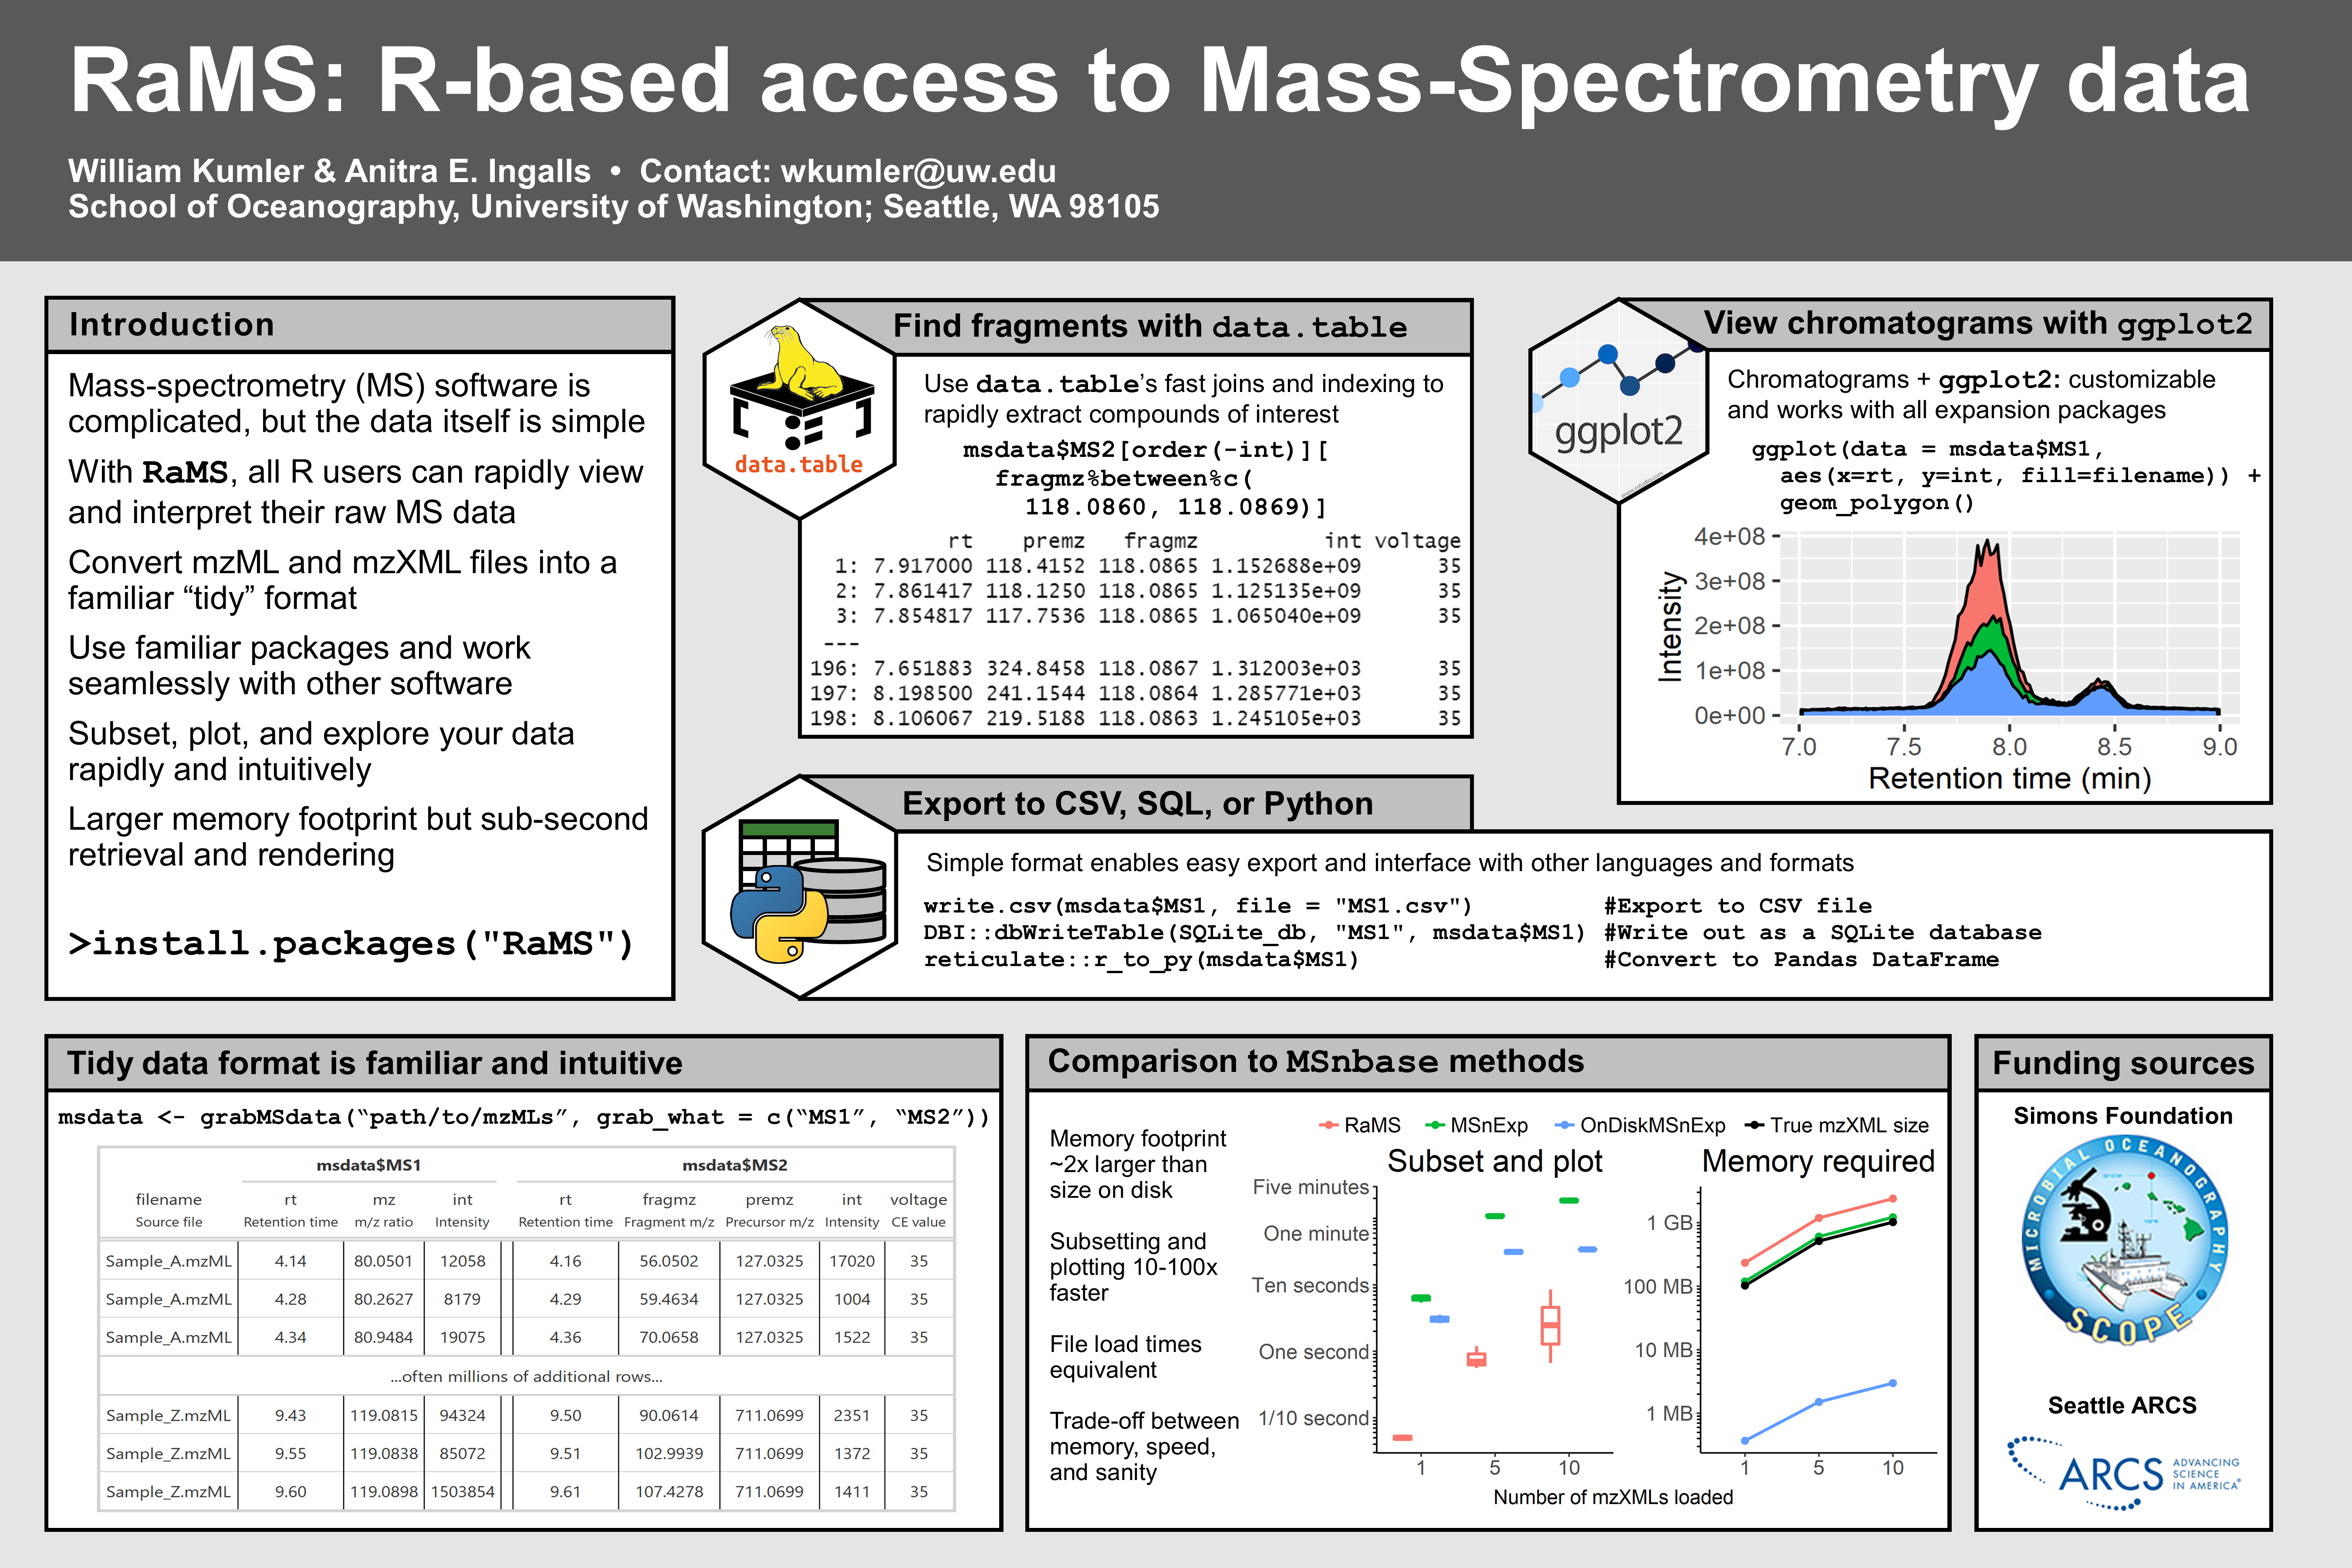 RaMS quick-start poster from Metabolomics Society conference 2021